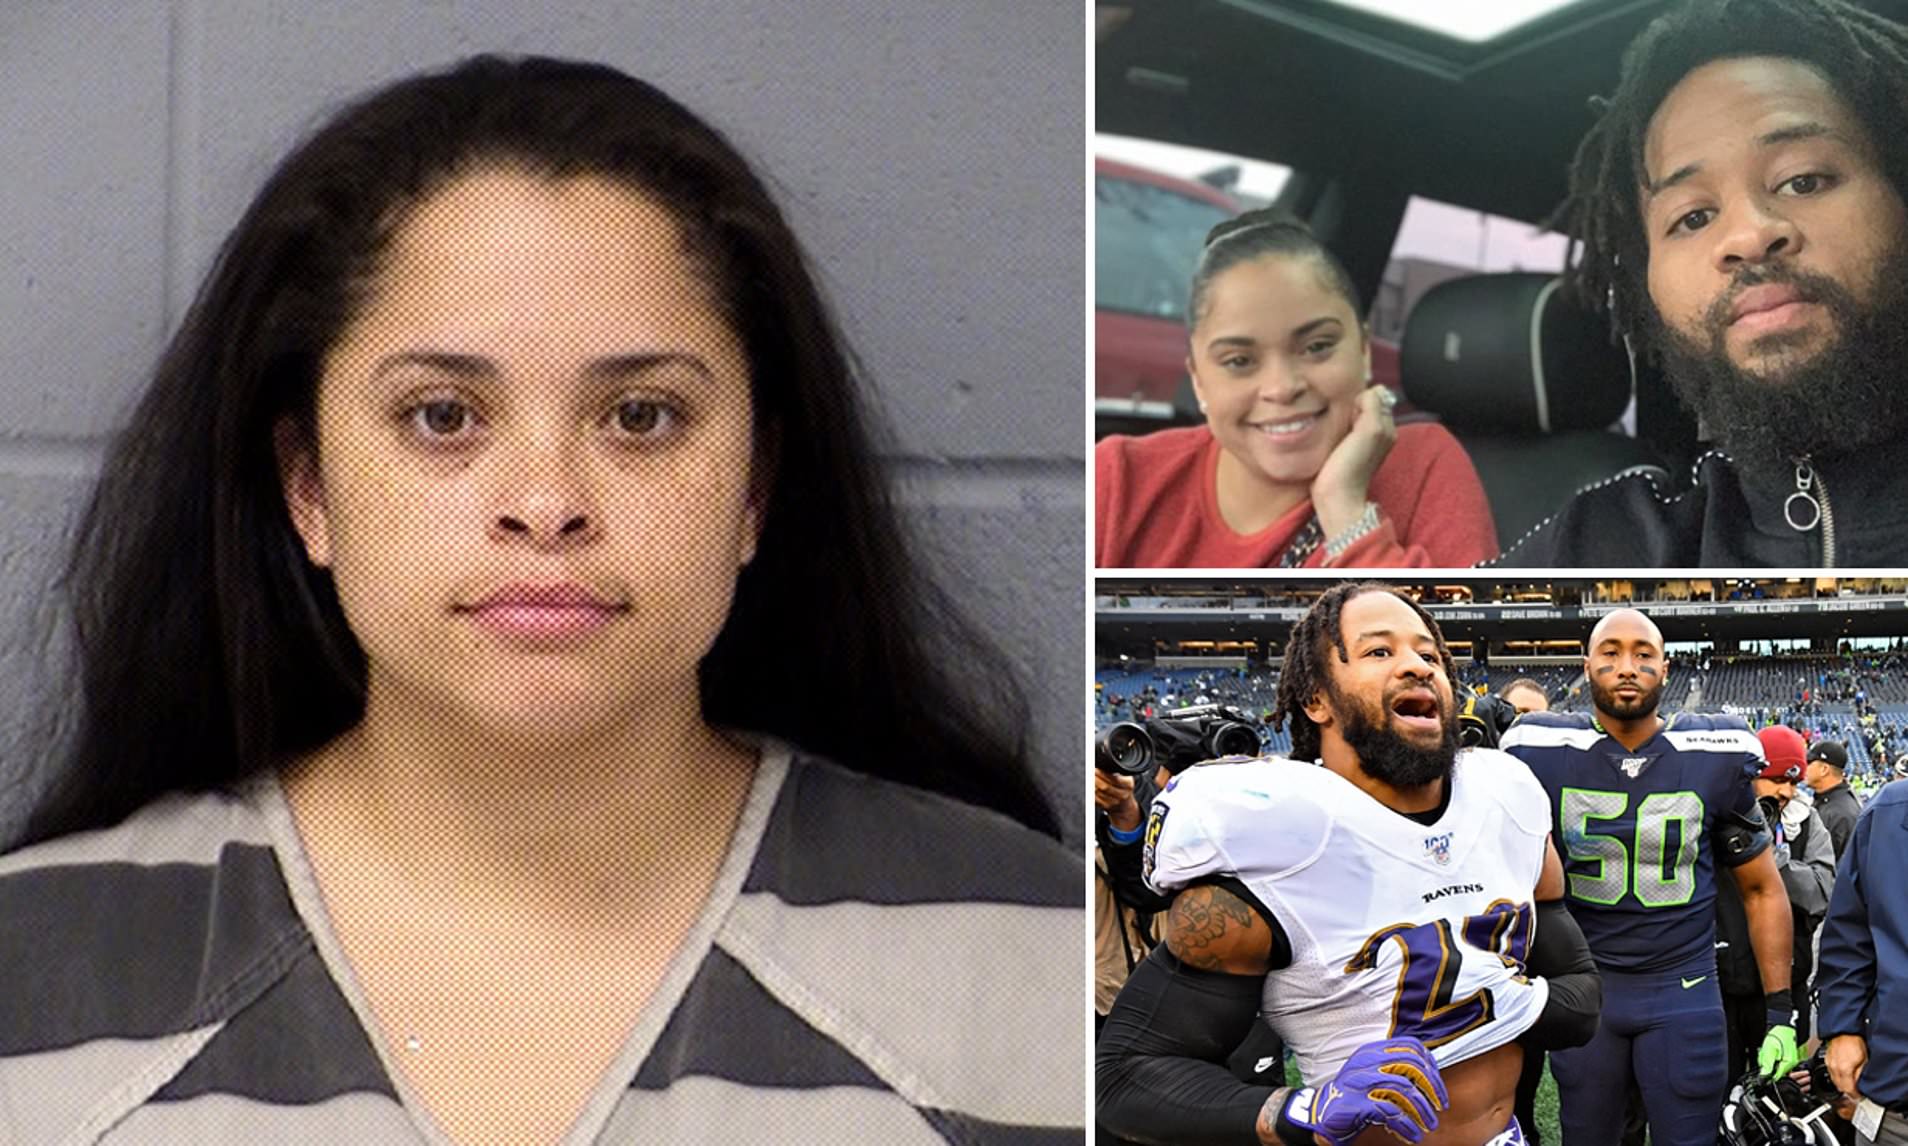 NFL player's wife pulls gun on him after catching him cheating